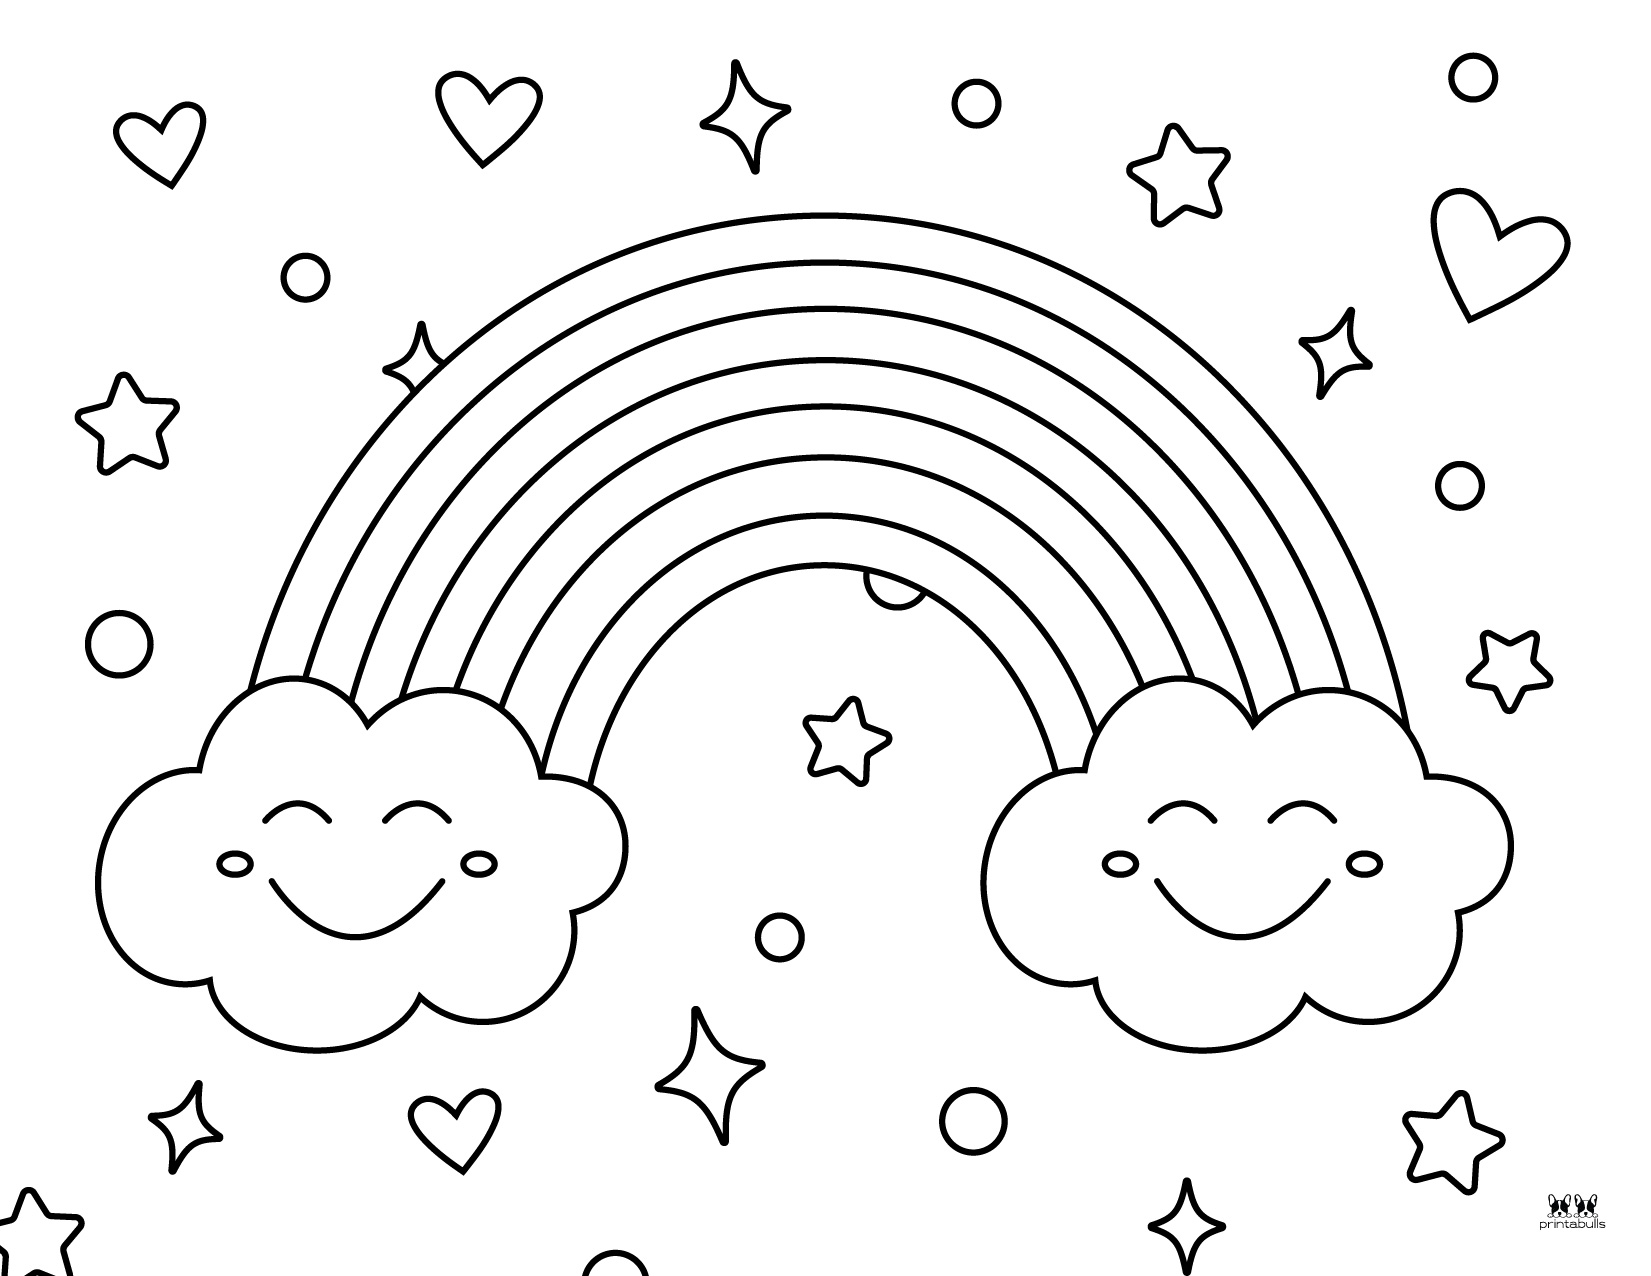 Rainbow Coloring Page 2